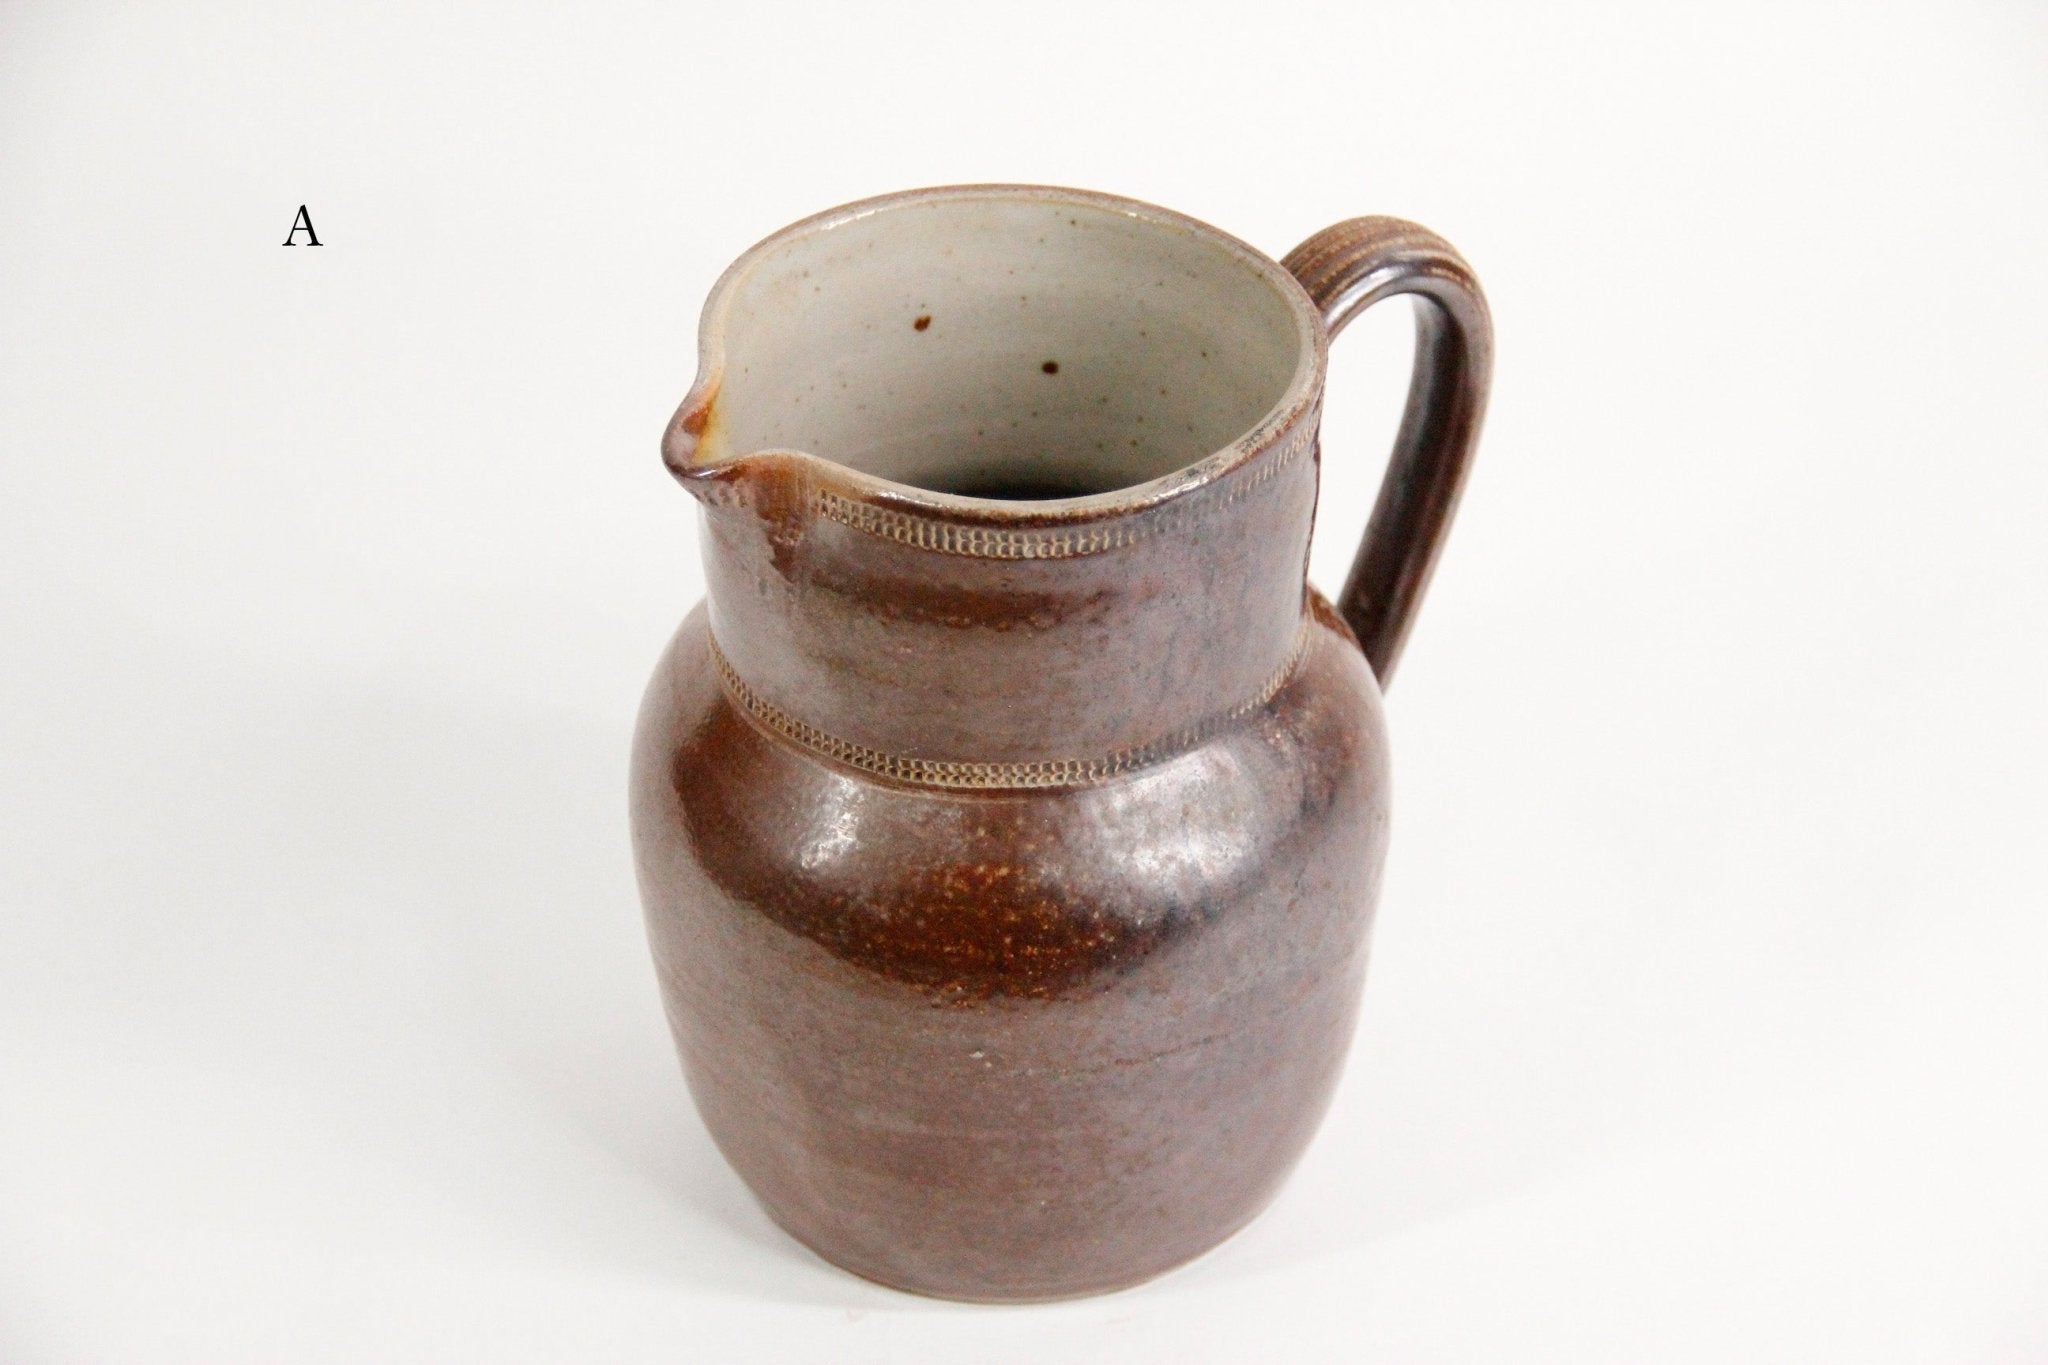 Antique French Pottery | Jug Pitcher - Debra Hall Lifestyle